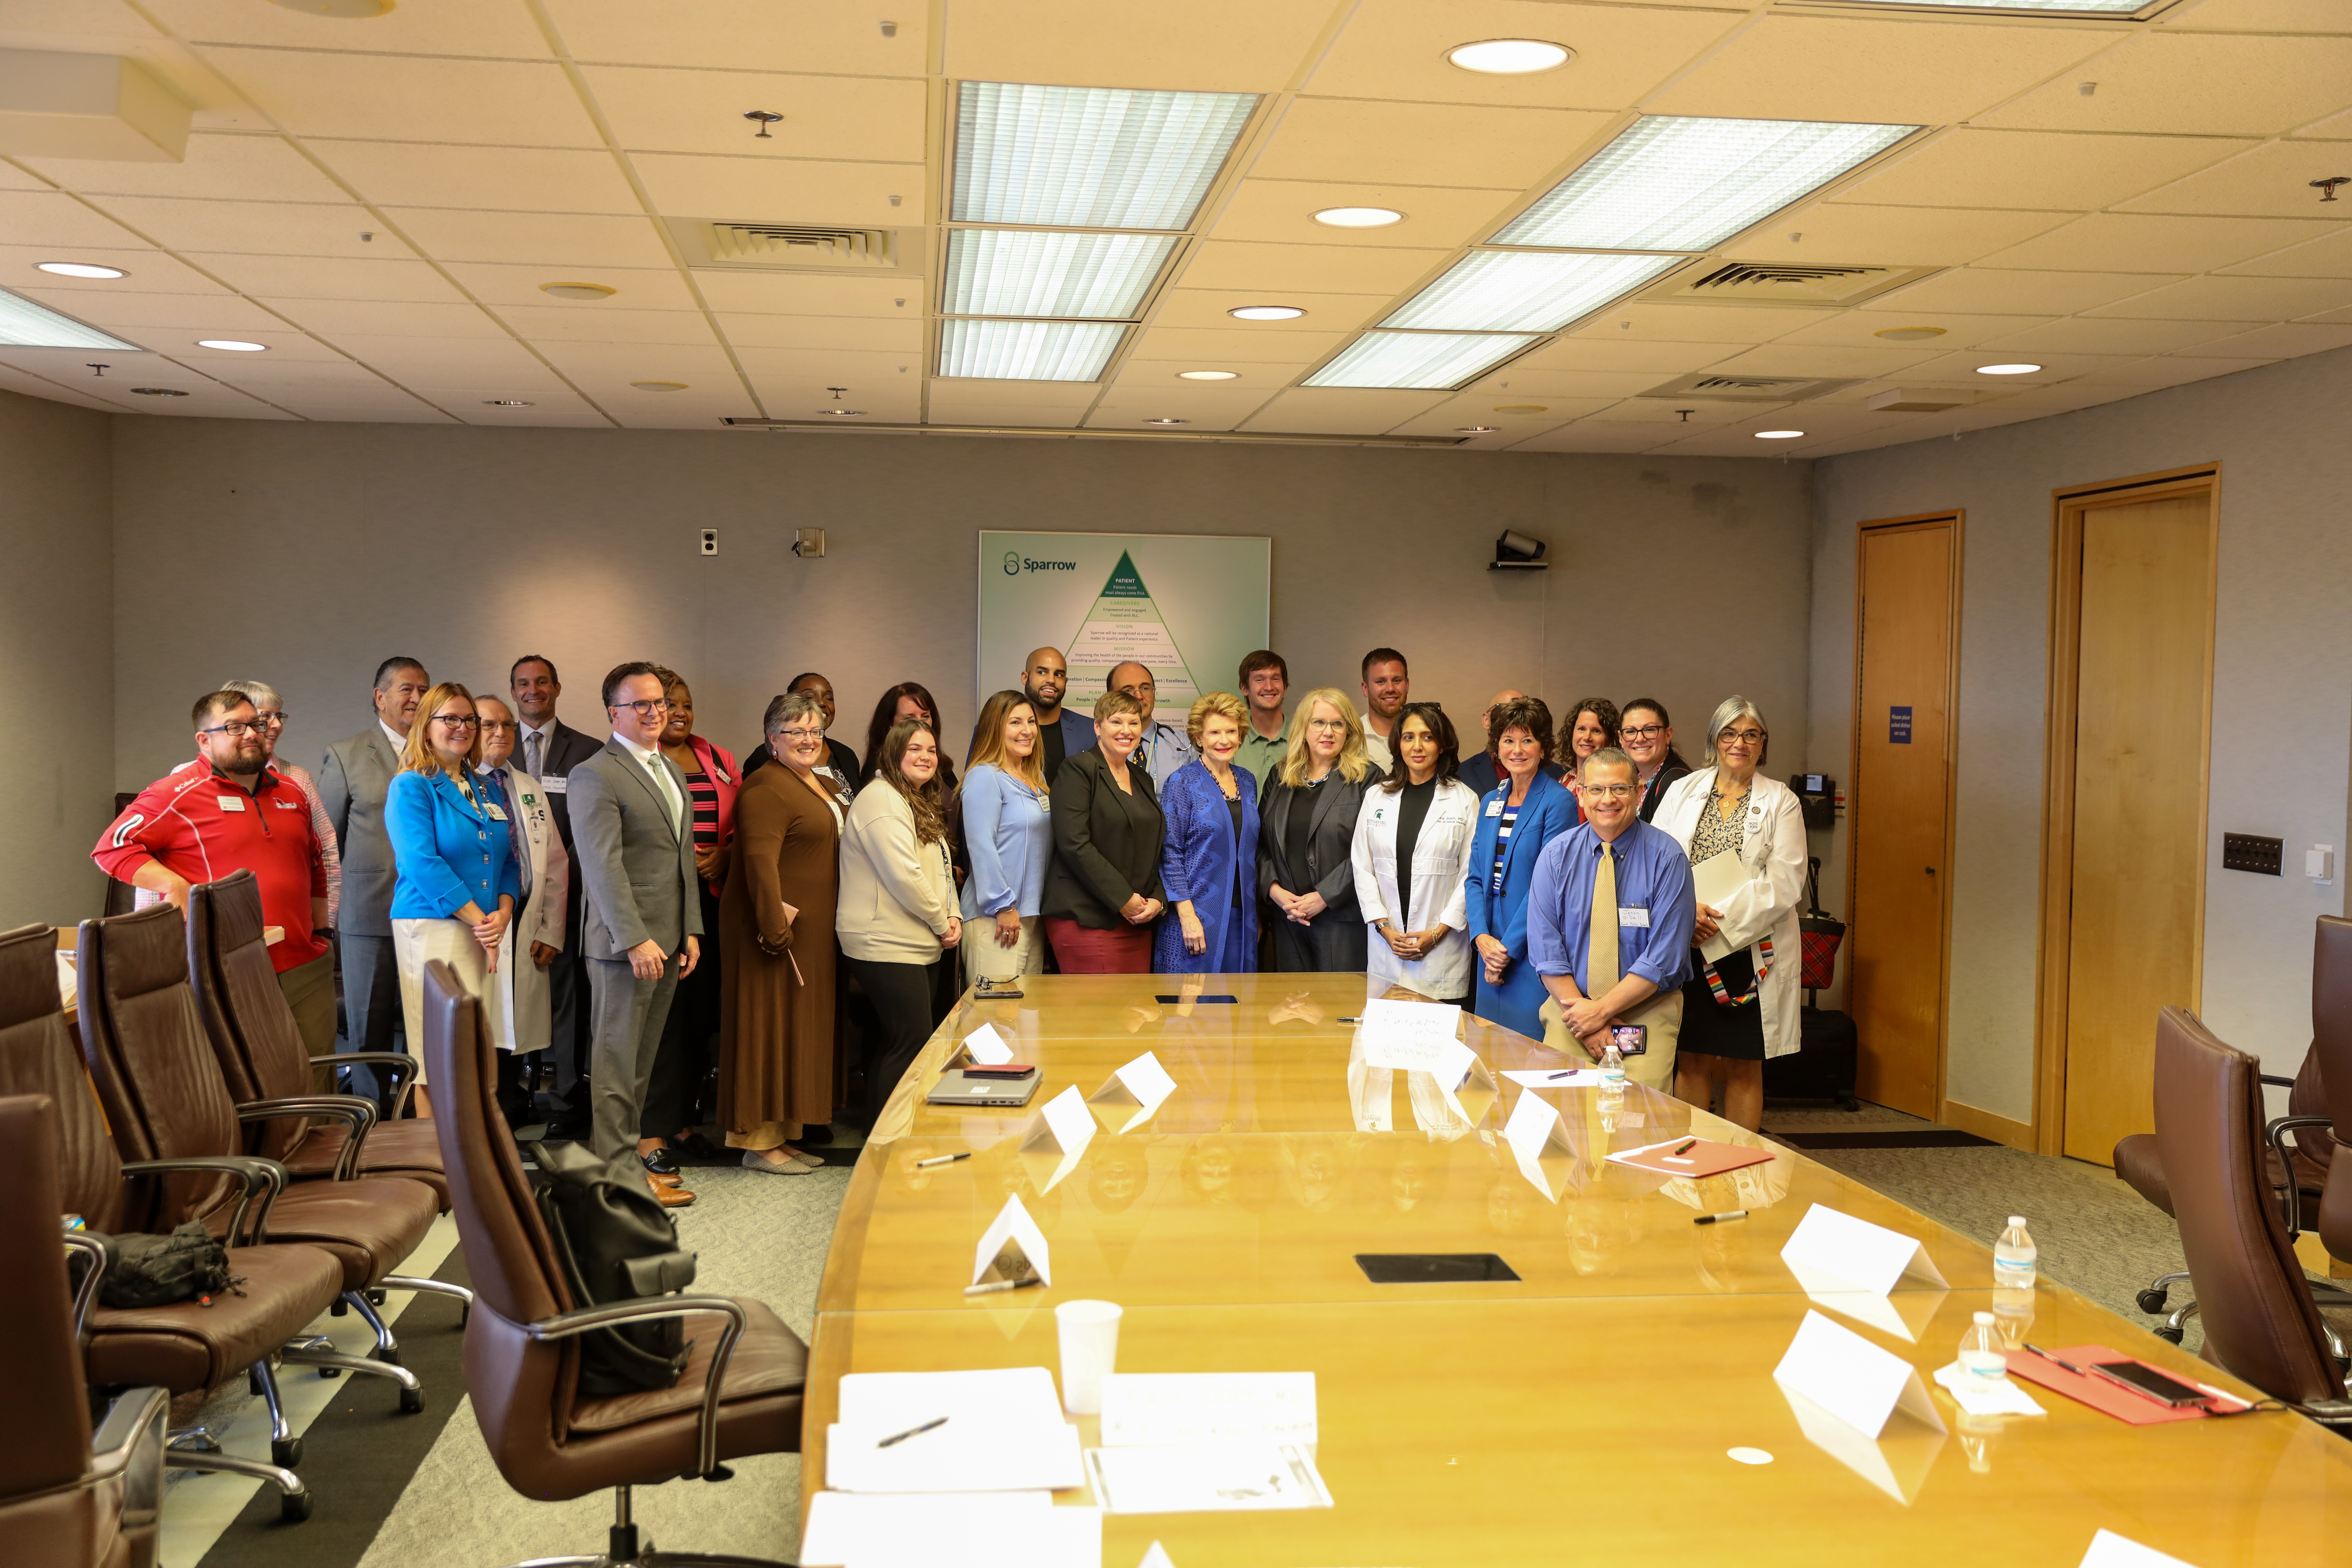 Michigan Senator Debbie Stabenow (center) with members of a Michigan Clinical Consultation & Care Program roundtable